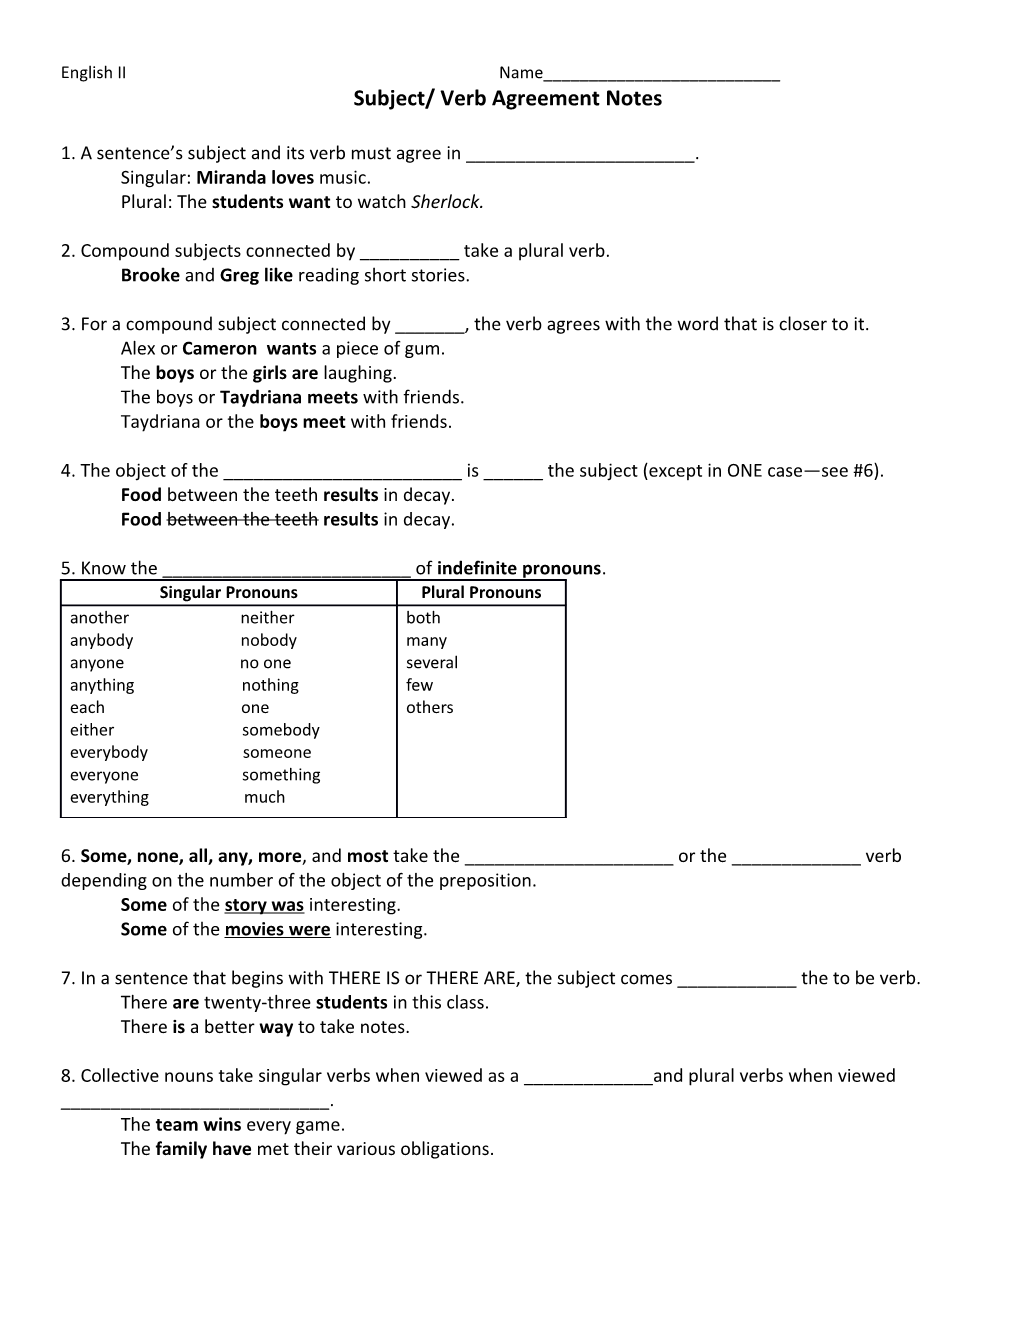 Subject/ Verb Agreement Notes